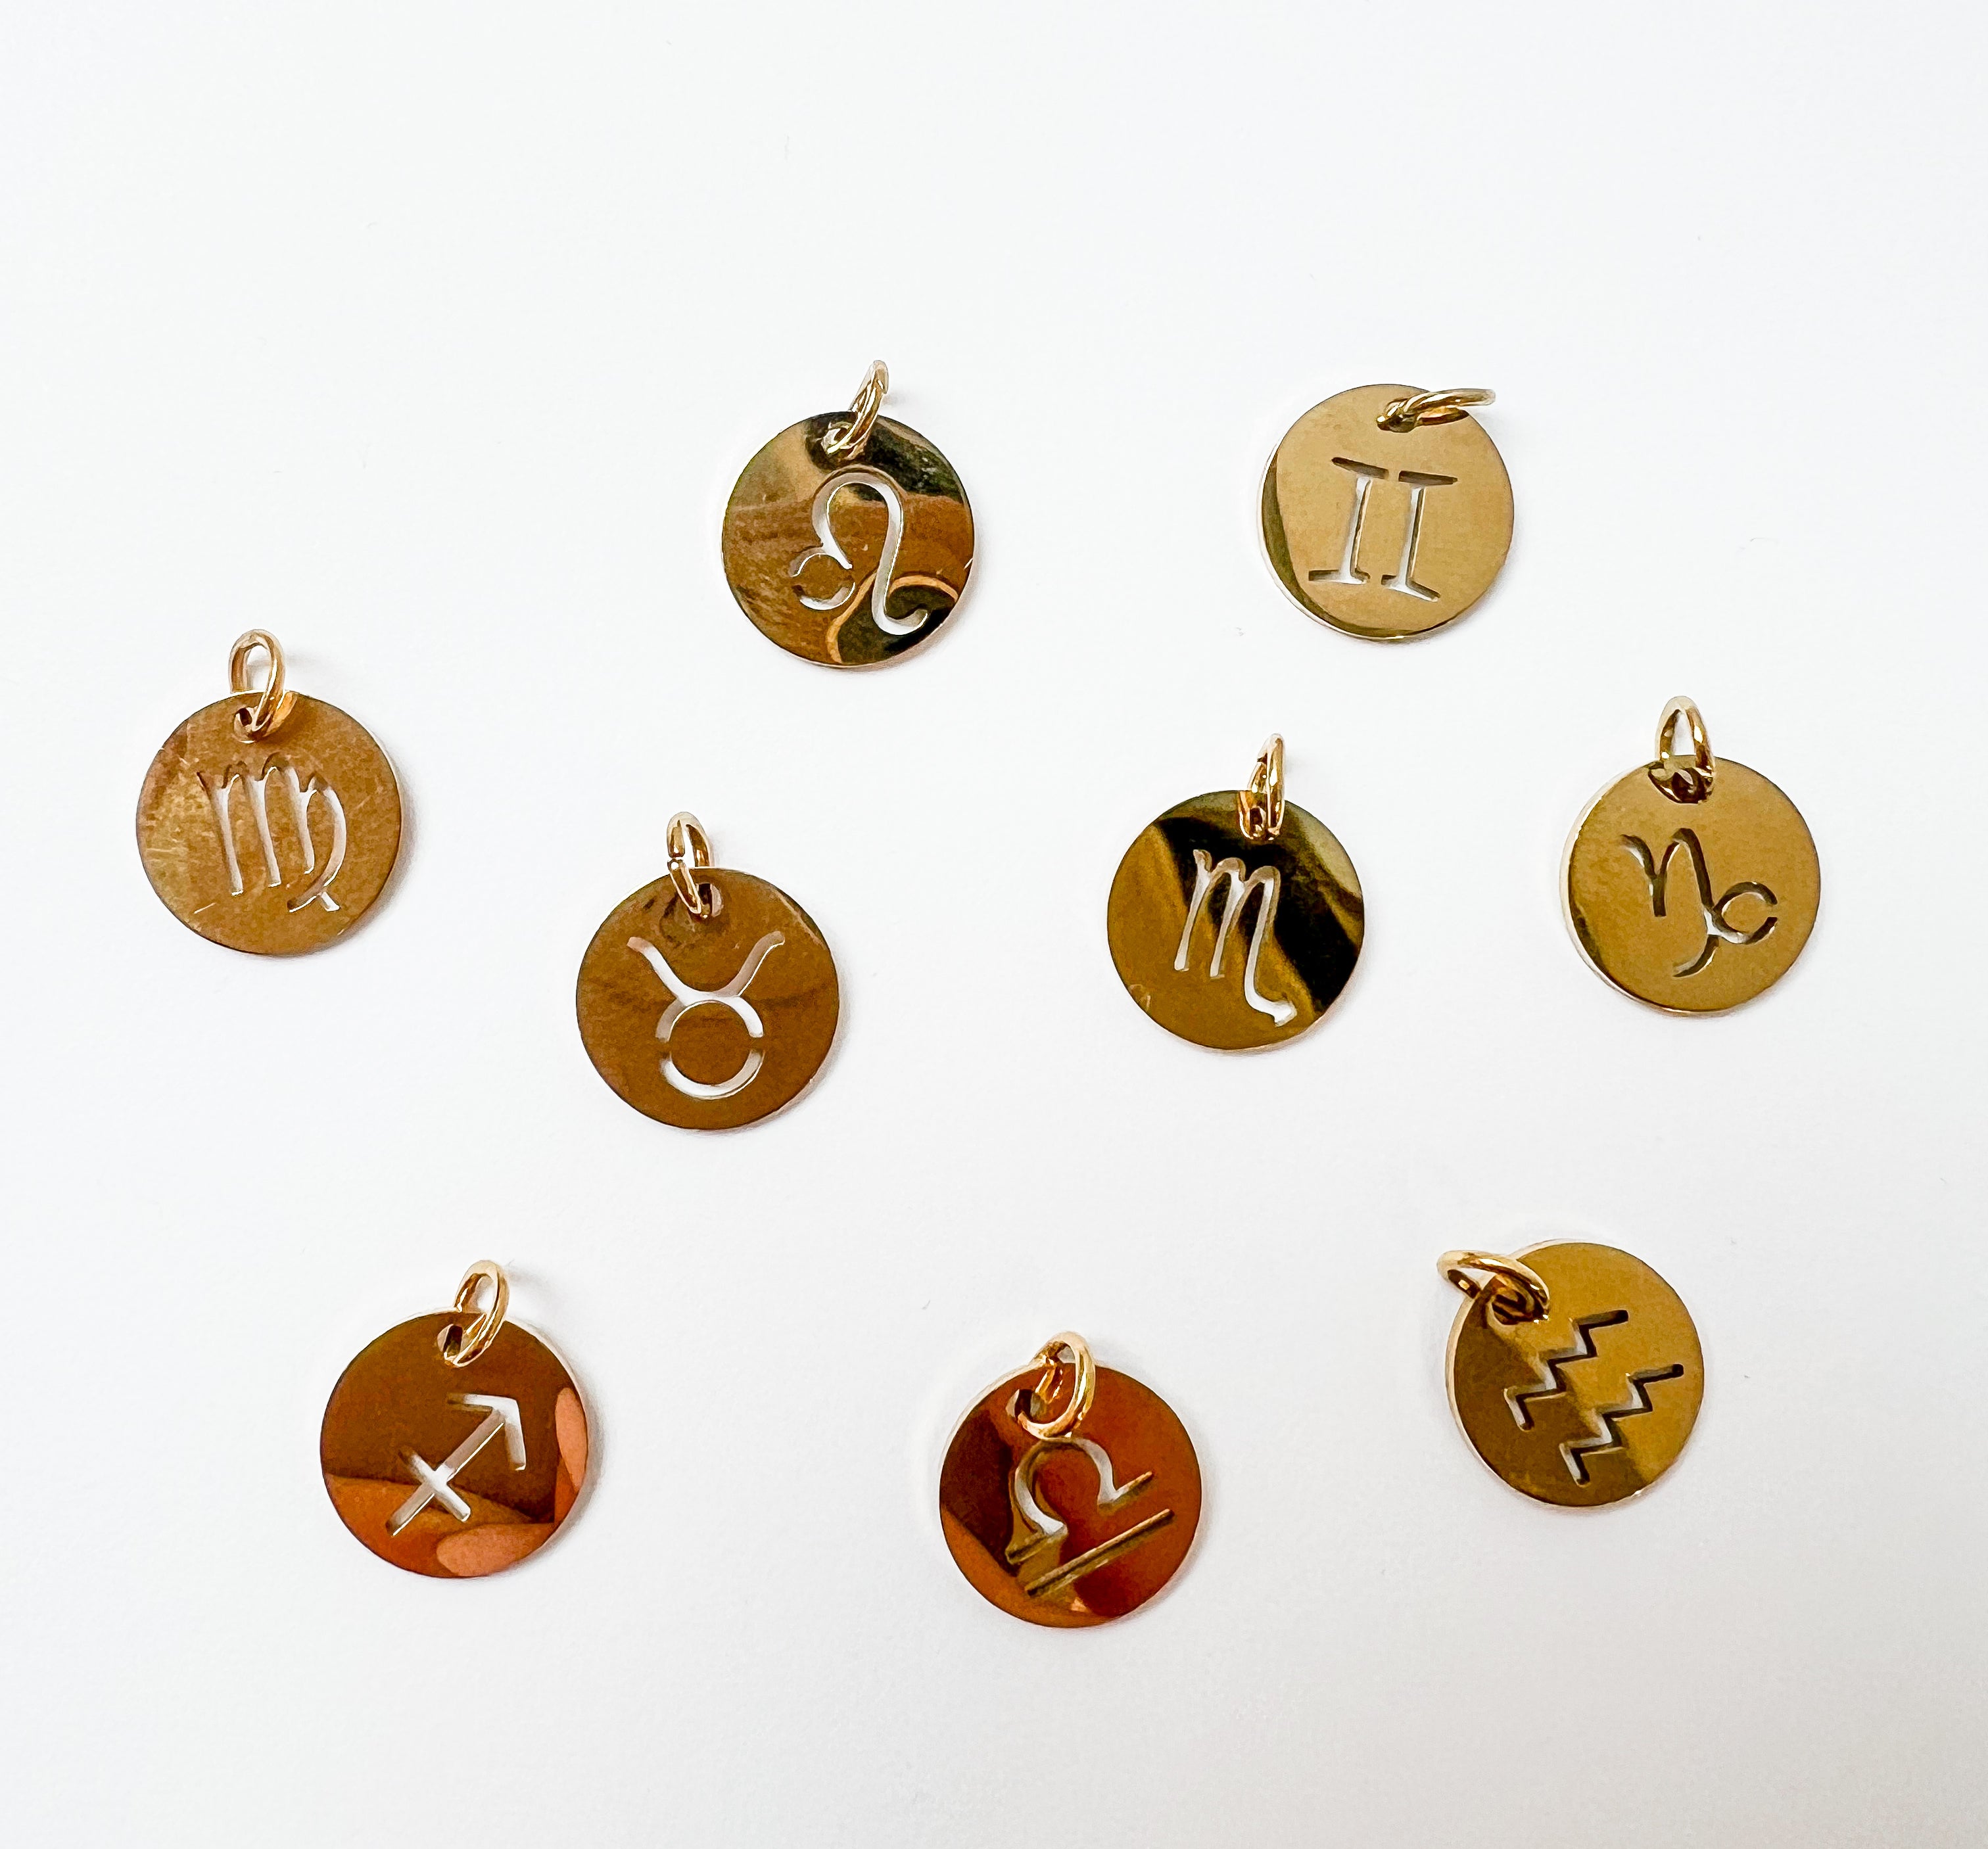 Choose Your Charms: Zodiac Signs